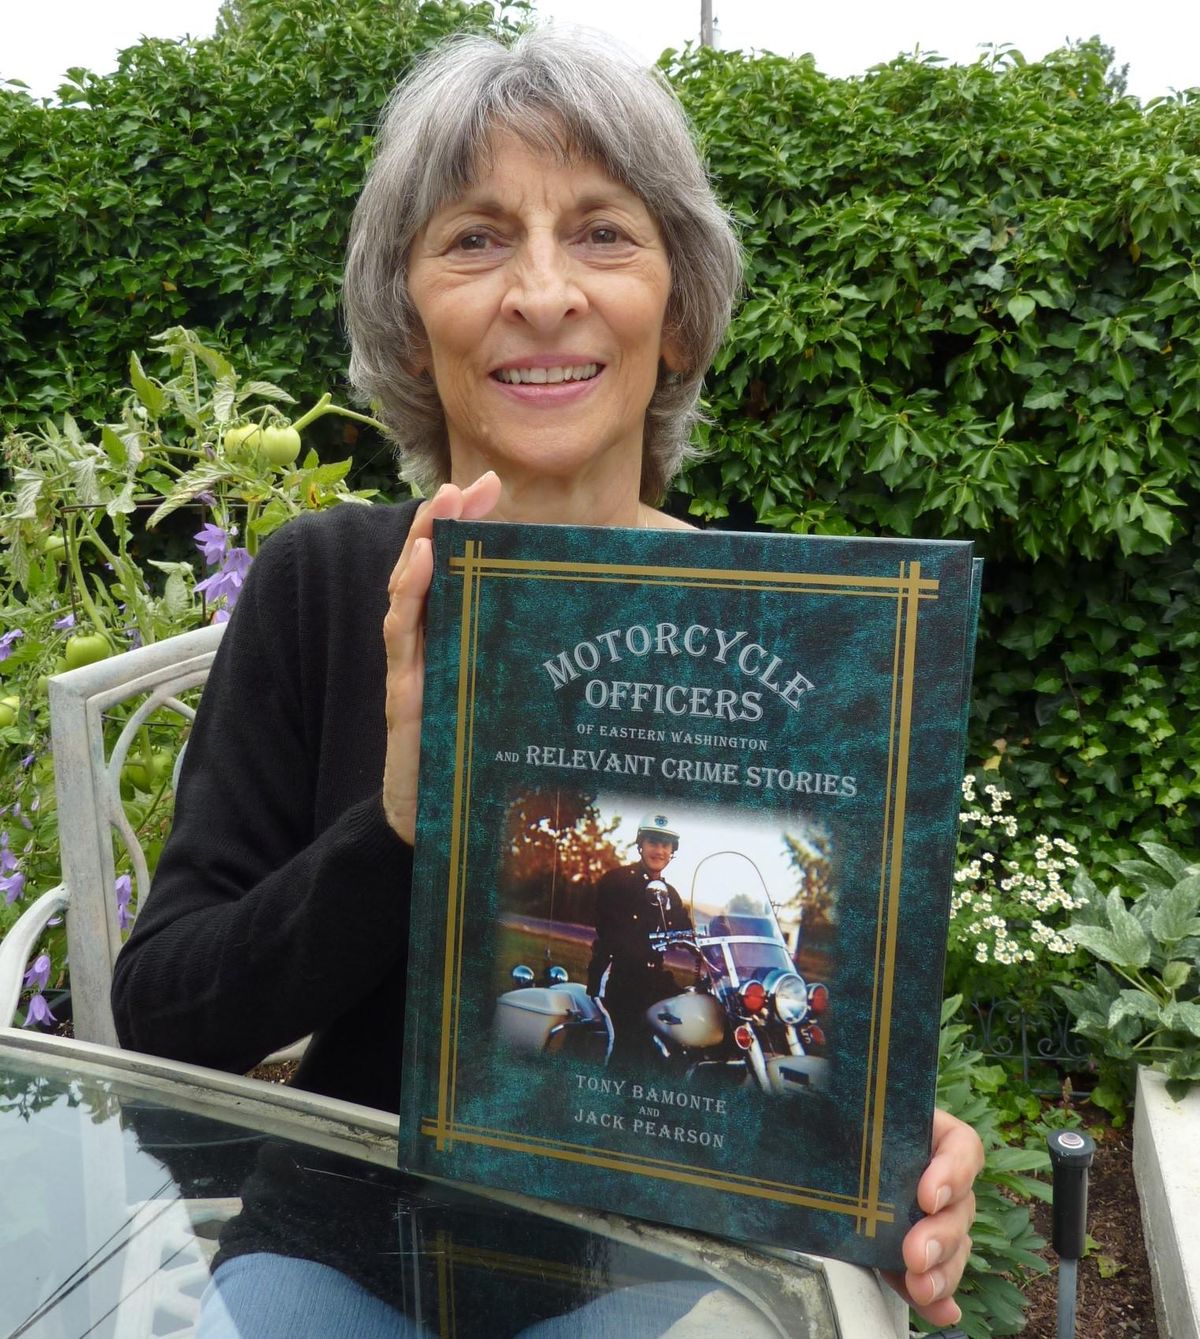 Suzanne Bamonte holds the book her husband, Tony Bamonte, was most proud of writing, “Motorcycle Officers of Eastern Washington and Relevant Crime Stories.” (Courtesy photo)